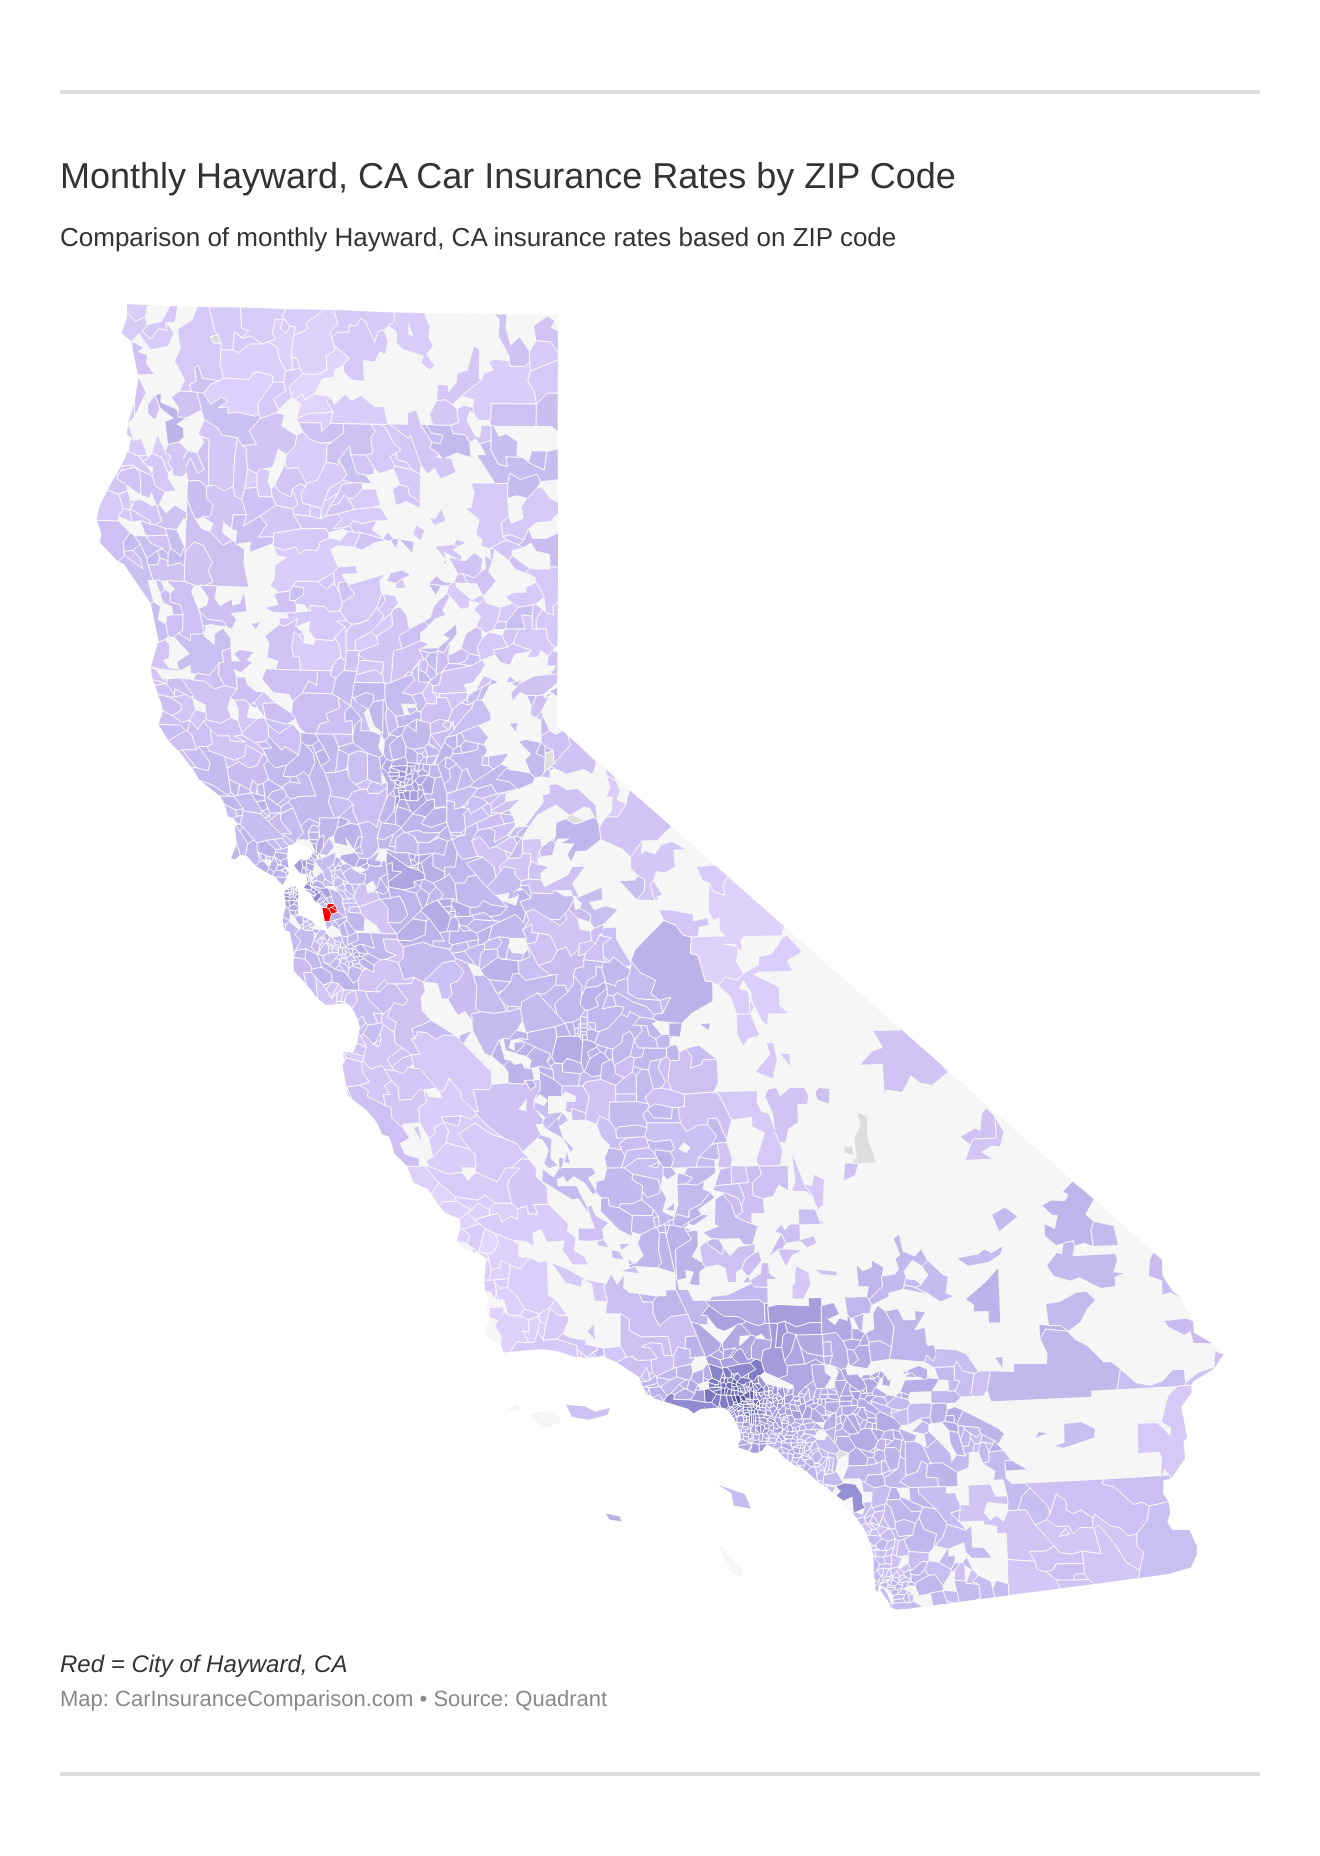 Monthly Hayward, CA Car Insurance Rates by ZIP Code